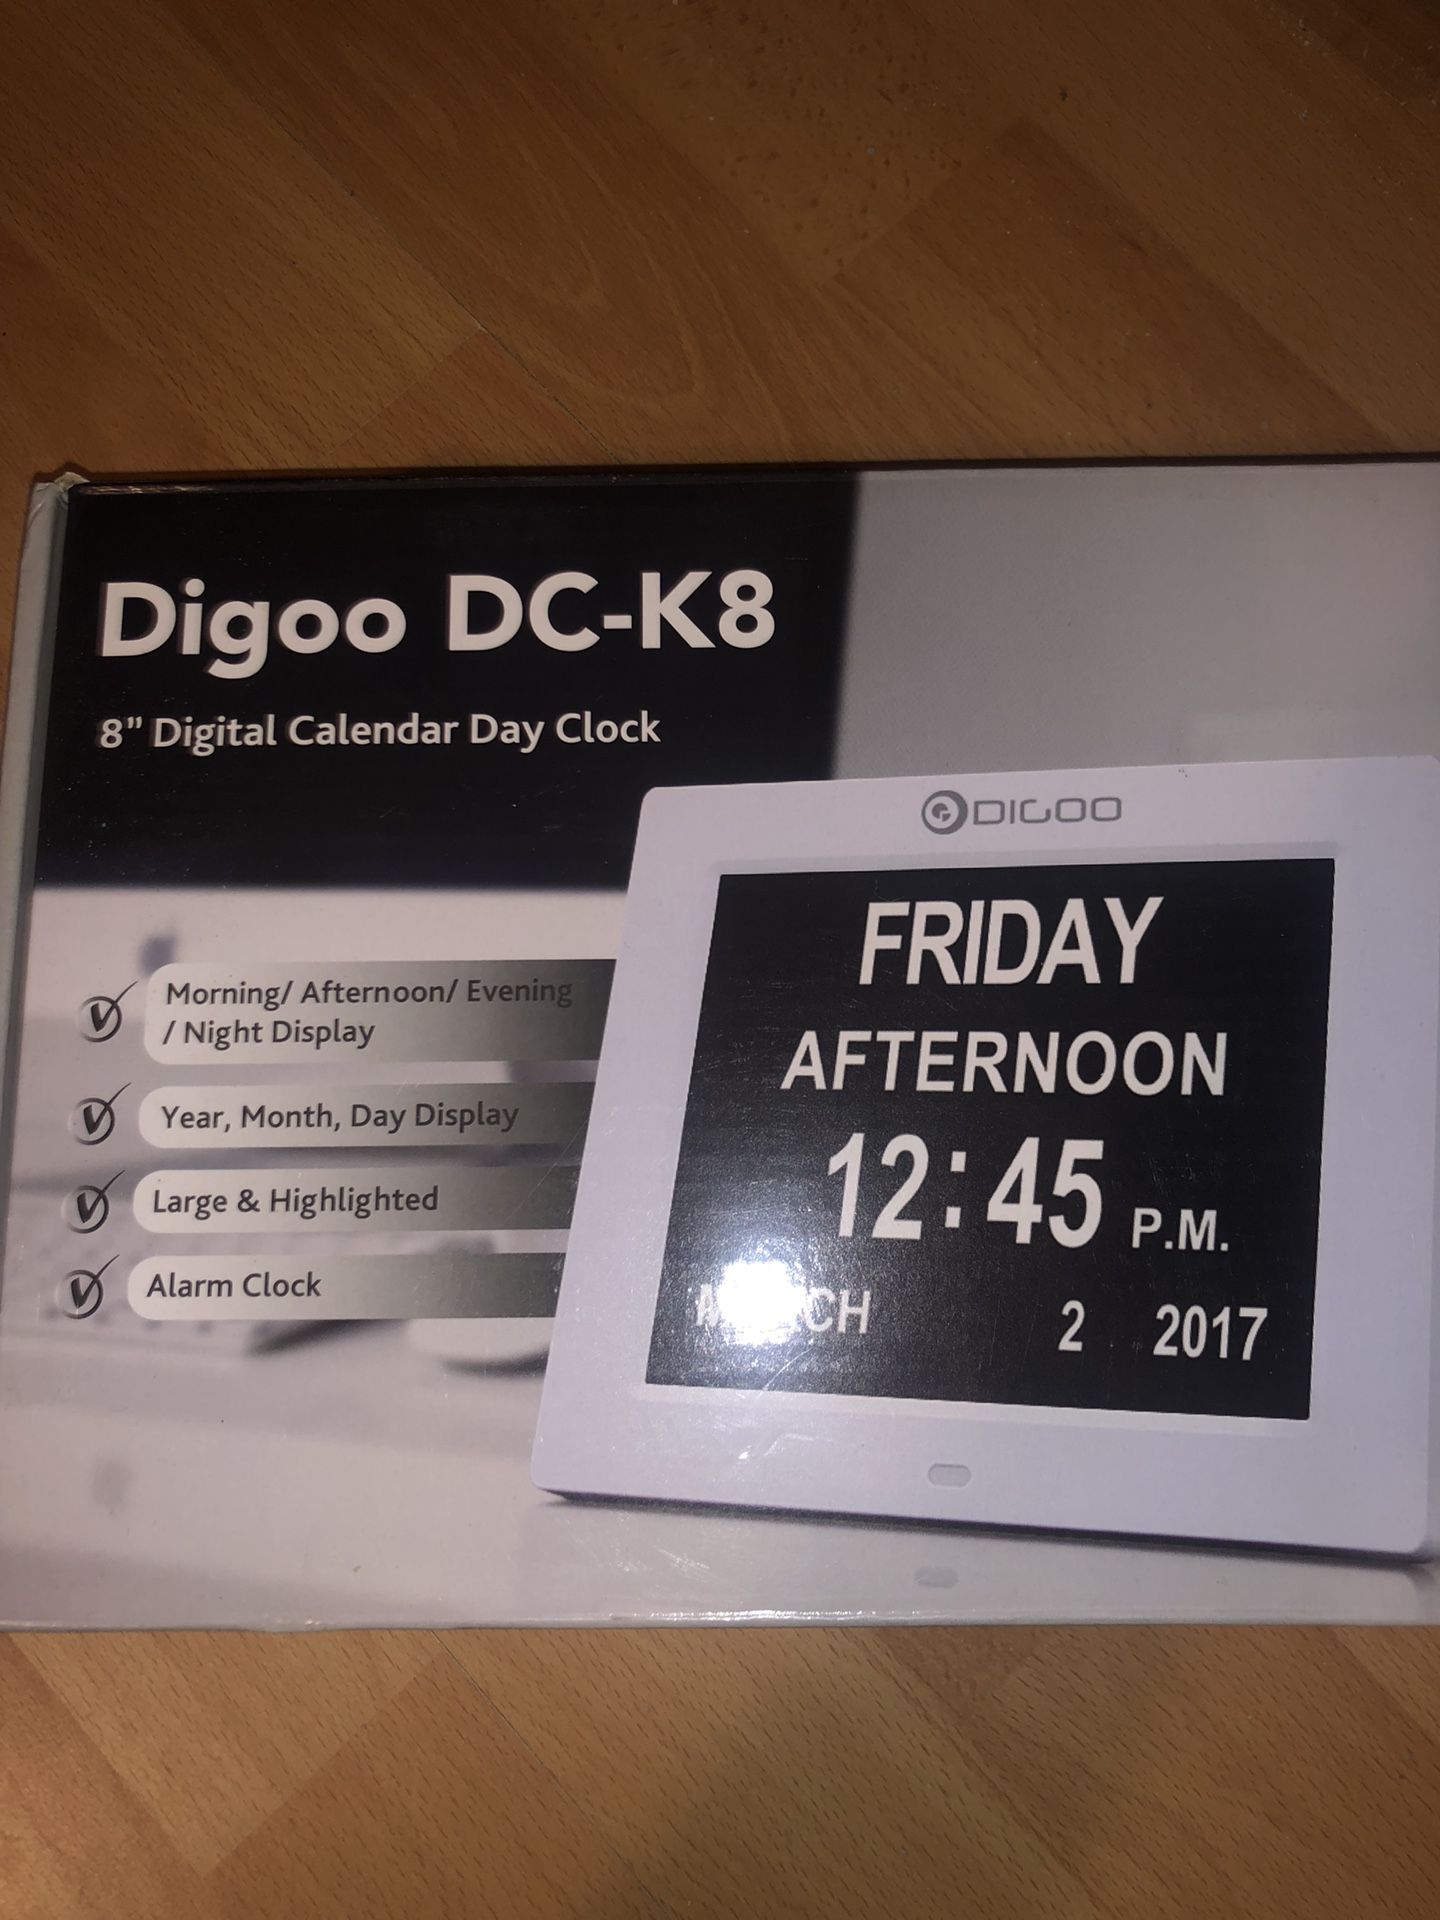 Digital Calendar Day Clock with Large Angle of View, Day Month & Year Display